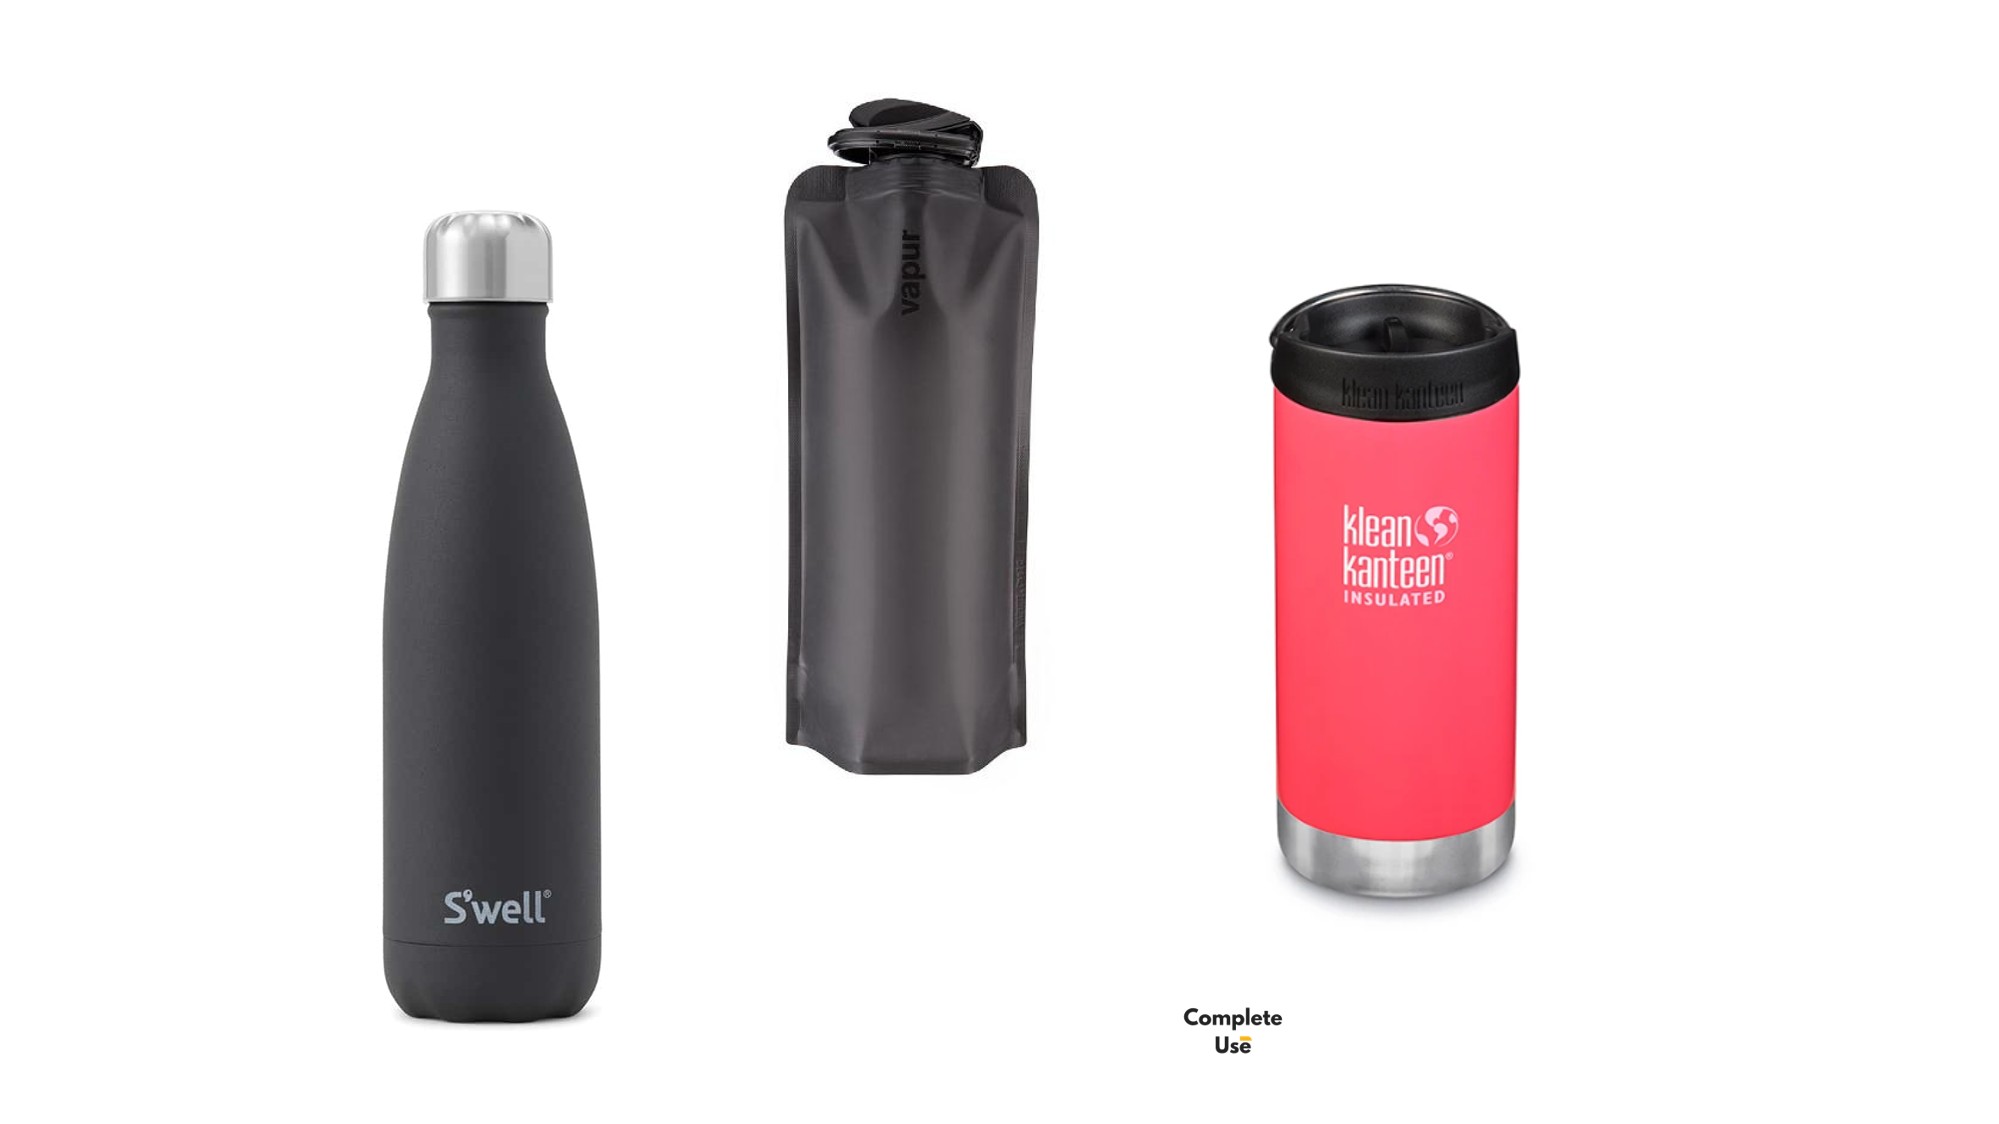 Top 5 “Buy it for Life” Water Bottles You Would Love to Own